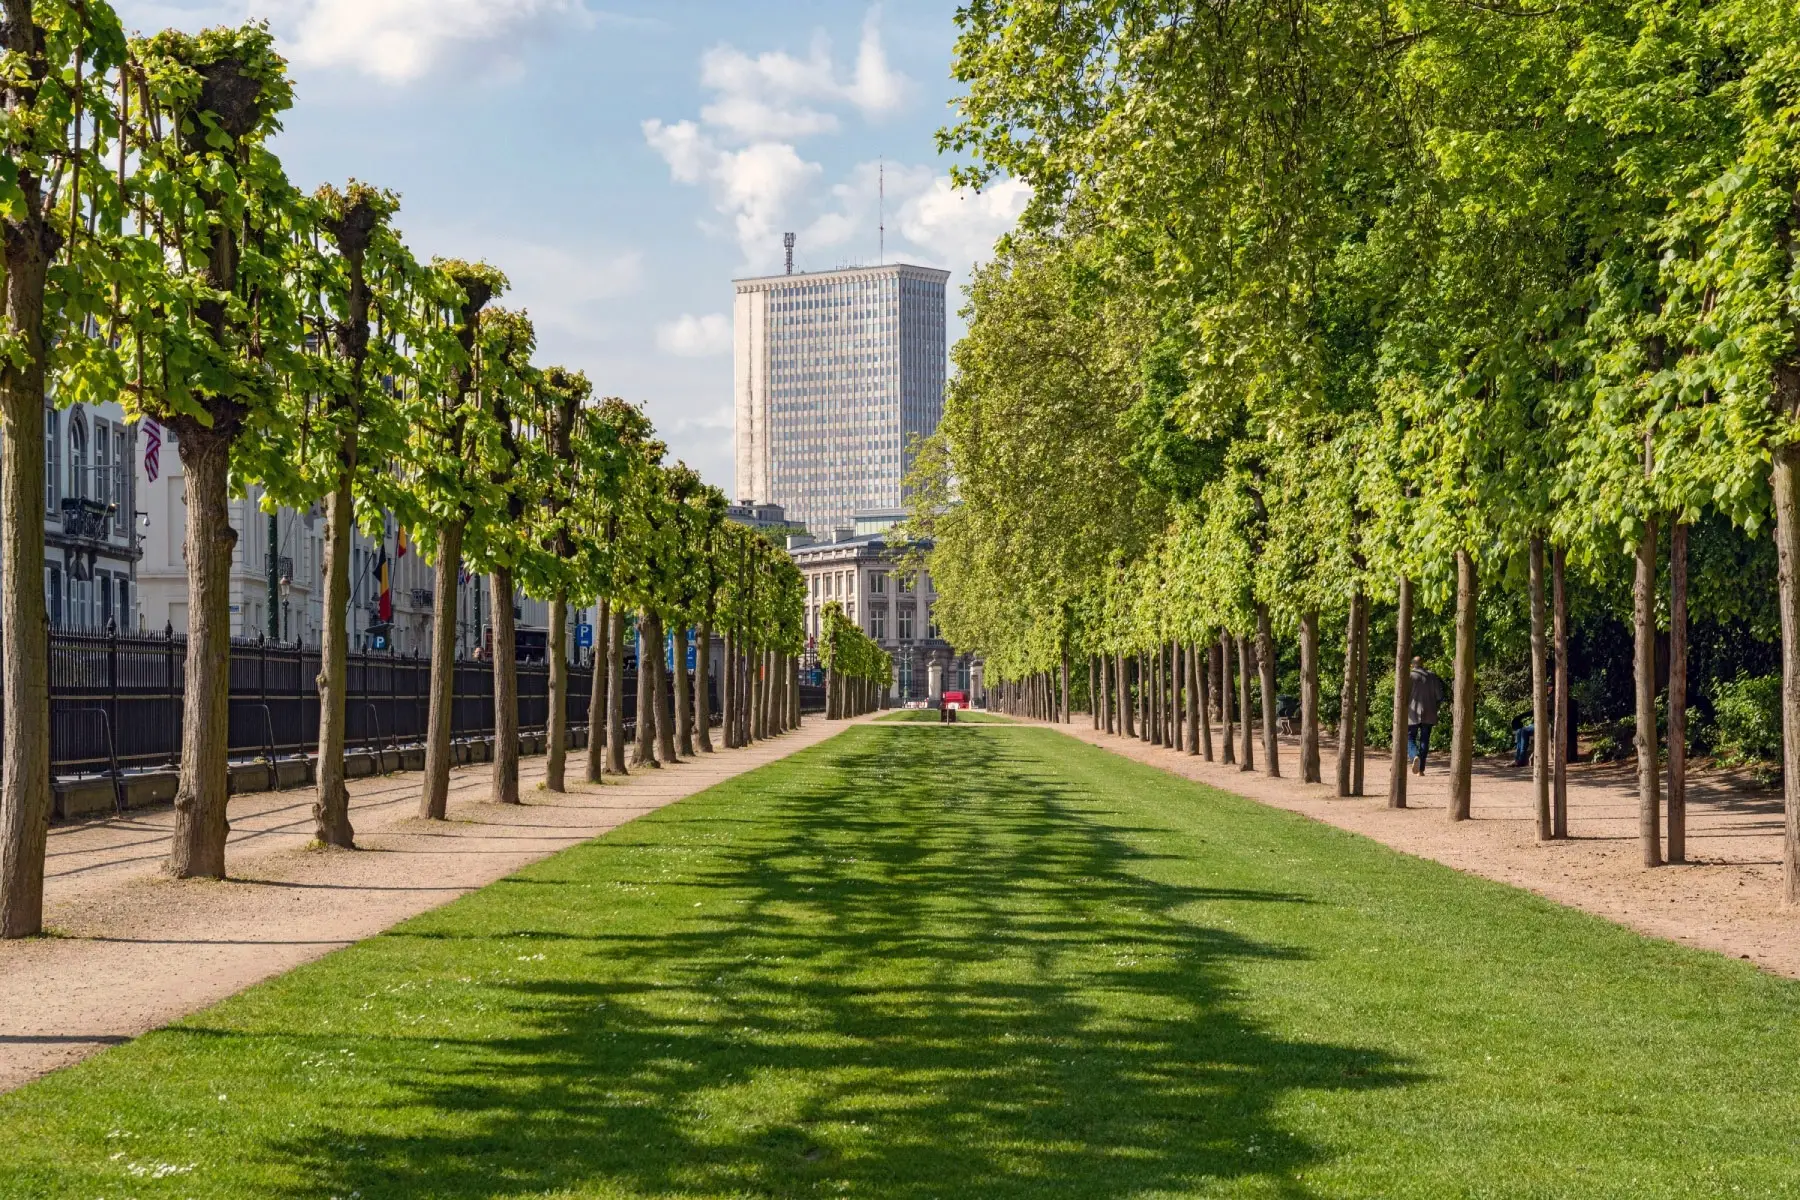 Row of trees leading to an office tower in Parc de Bruxelles in Brussels